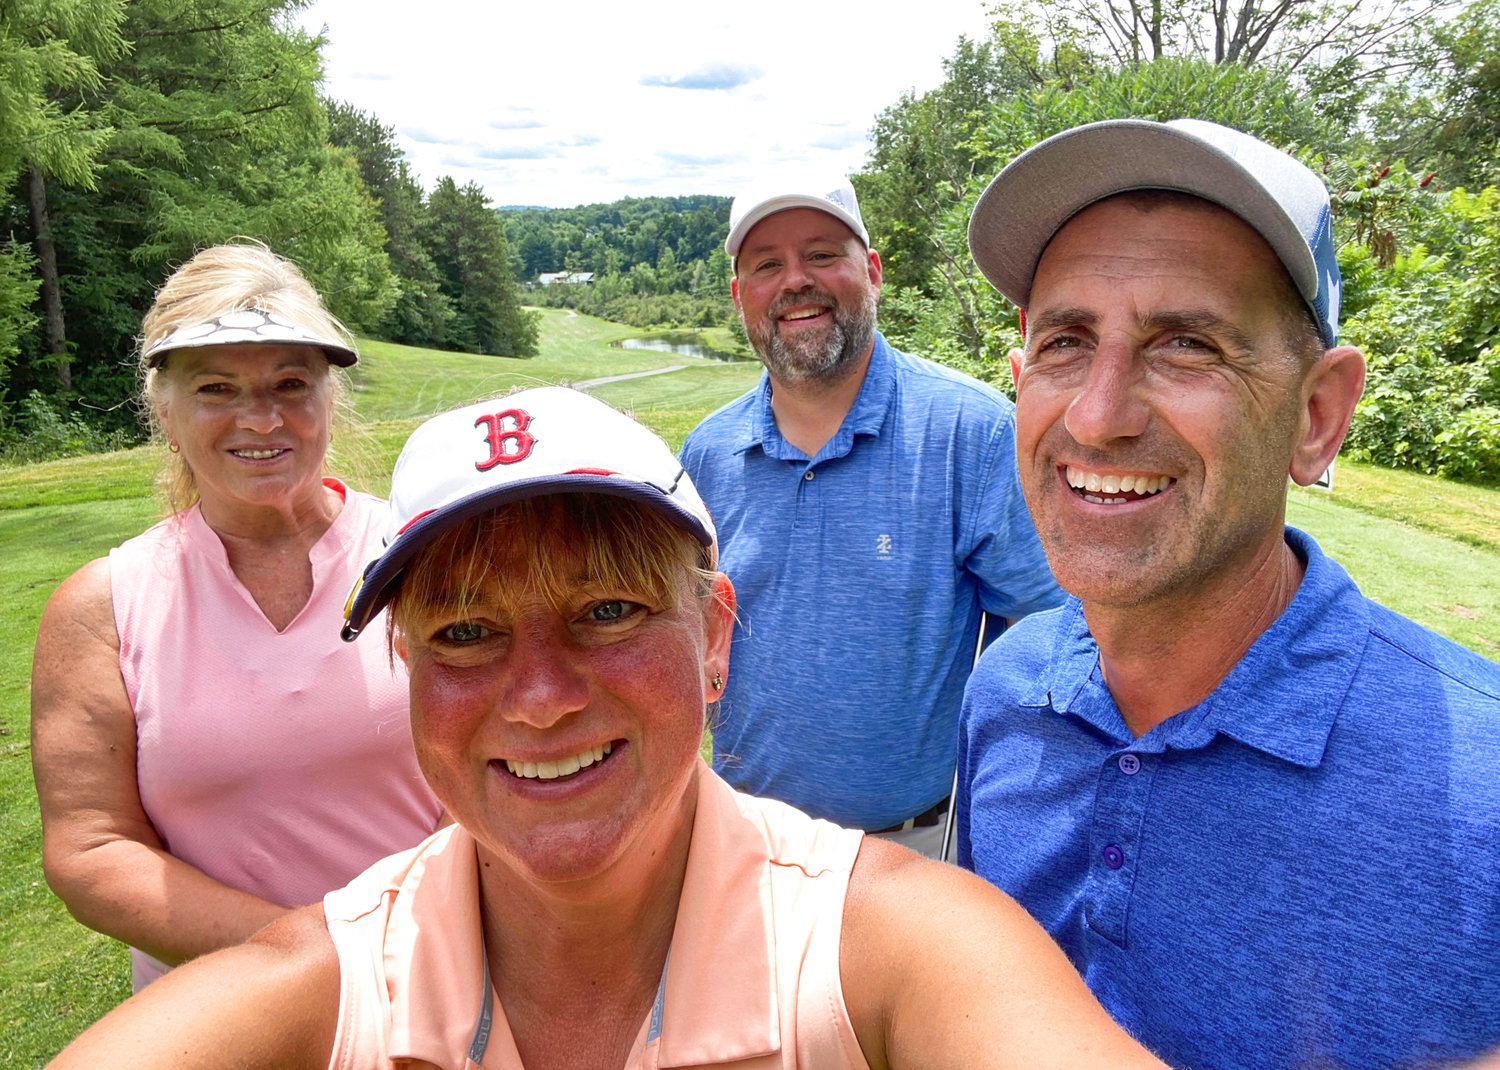 Officer William Preuss likes to spend his free time on the golf course. From left to right: Ada Sue Paratore, Kristen Drake, William Preuss, and Rob Drake.